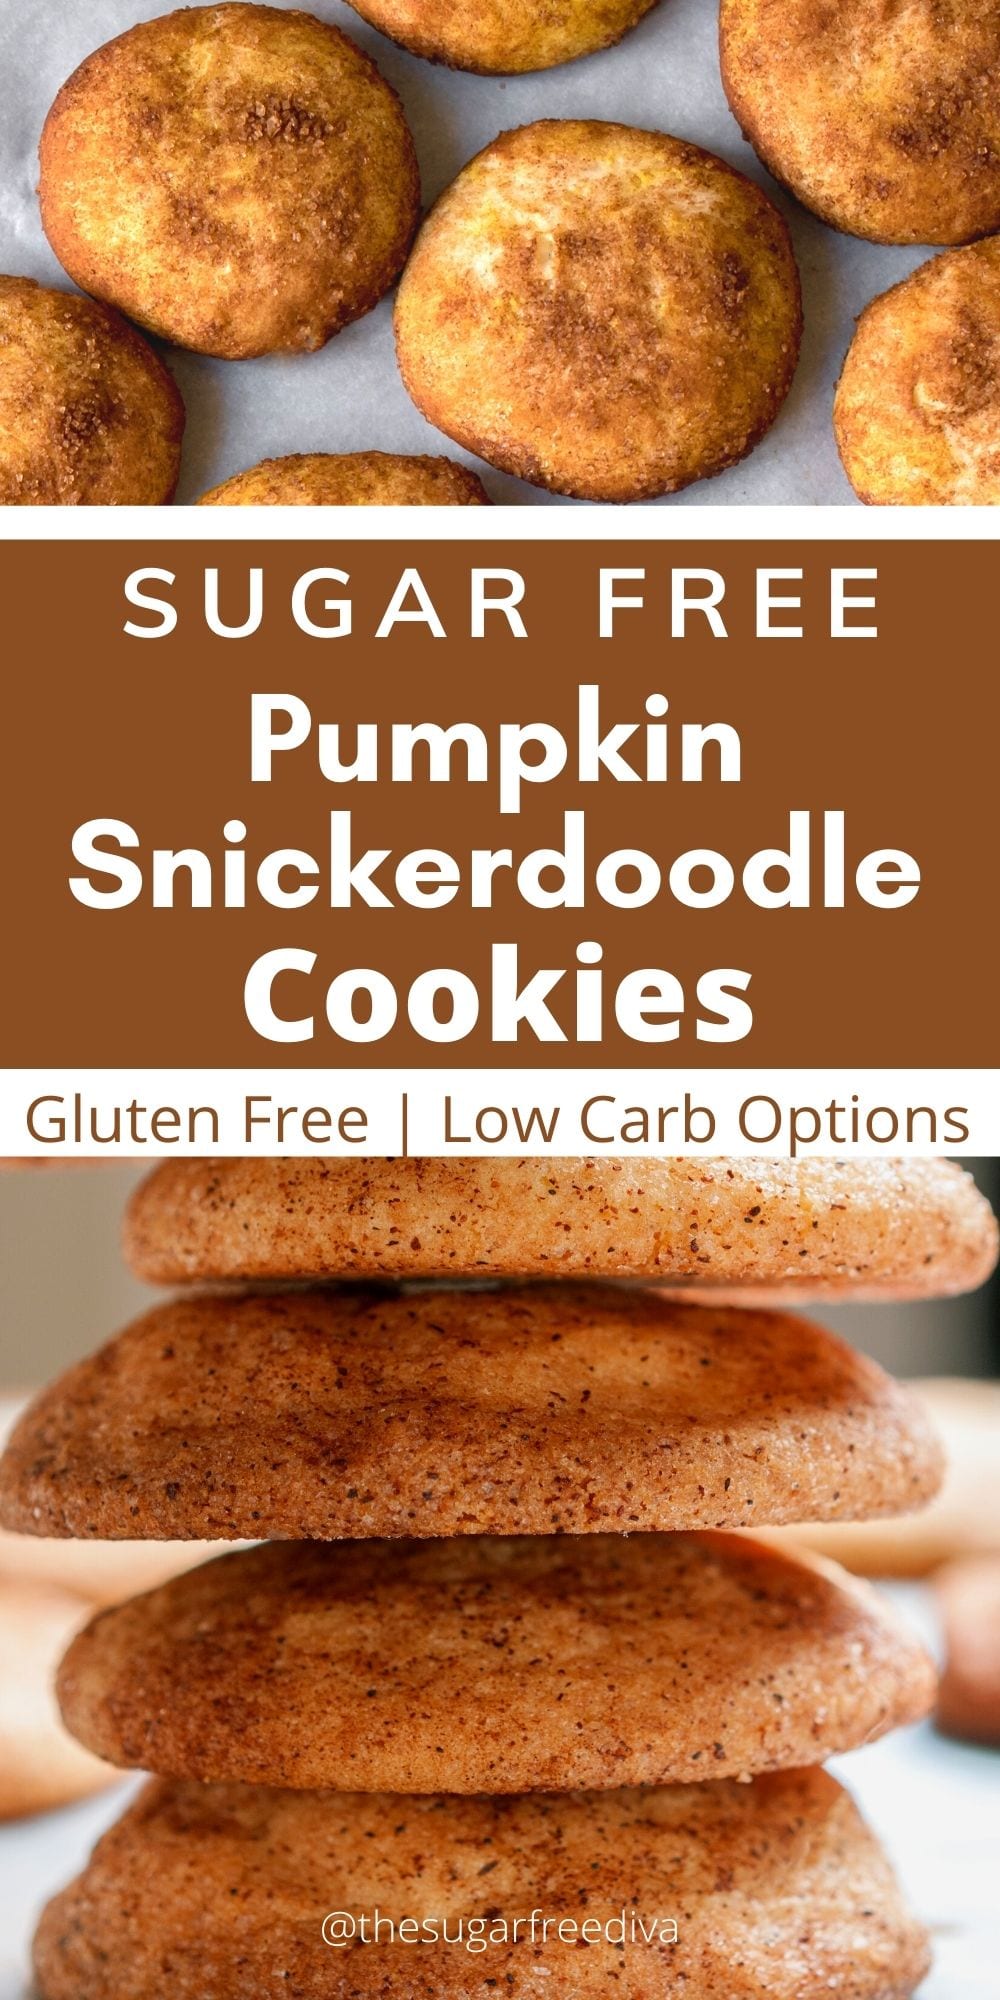 Sugar Free Pumpkin Snickerdoodle Cookies, an easy and delicious recipe for dessert or snacks, no added sugar!